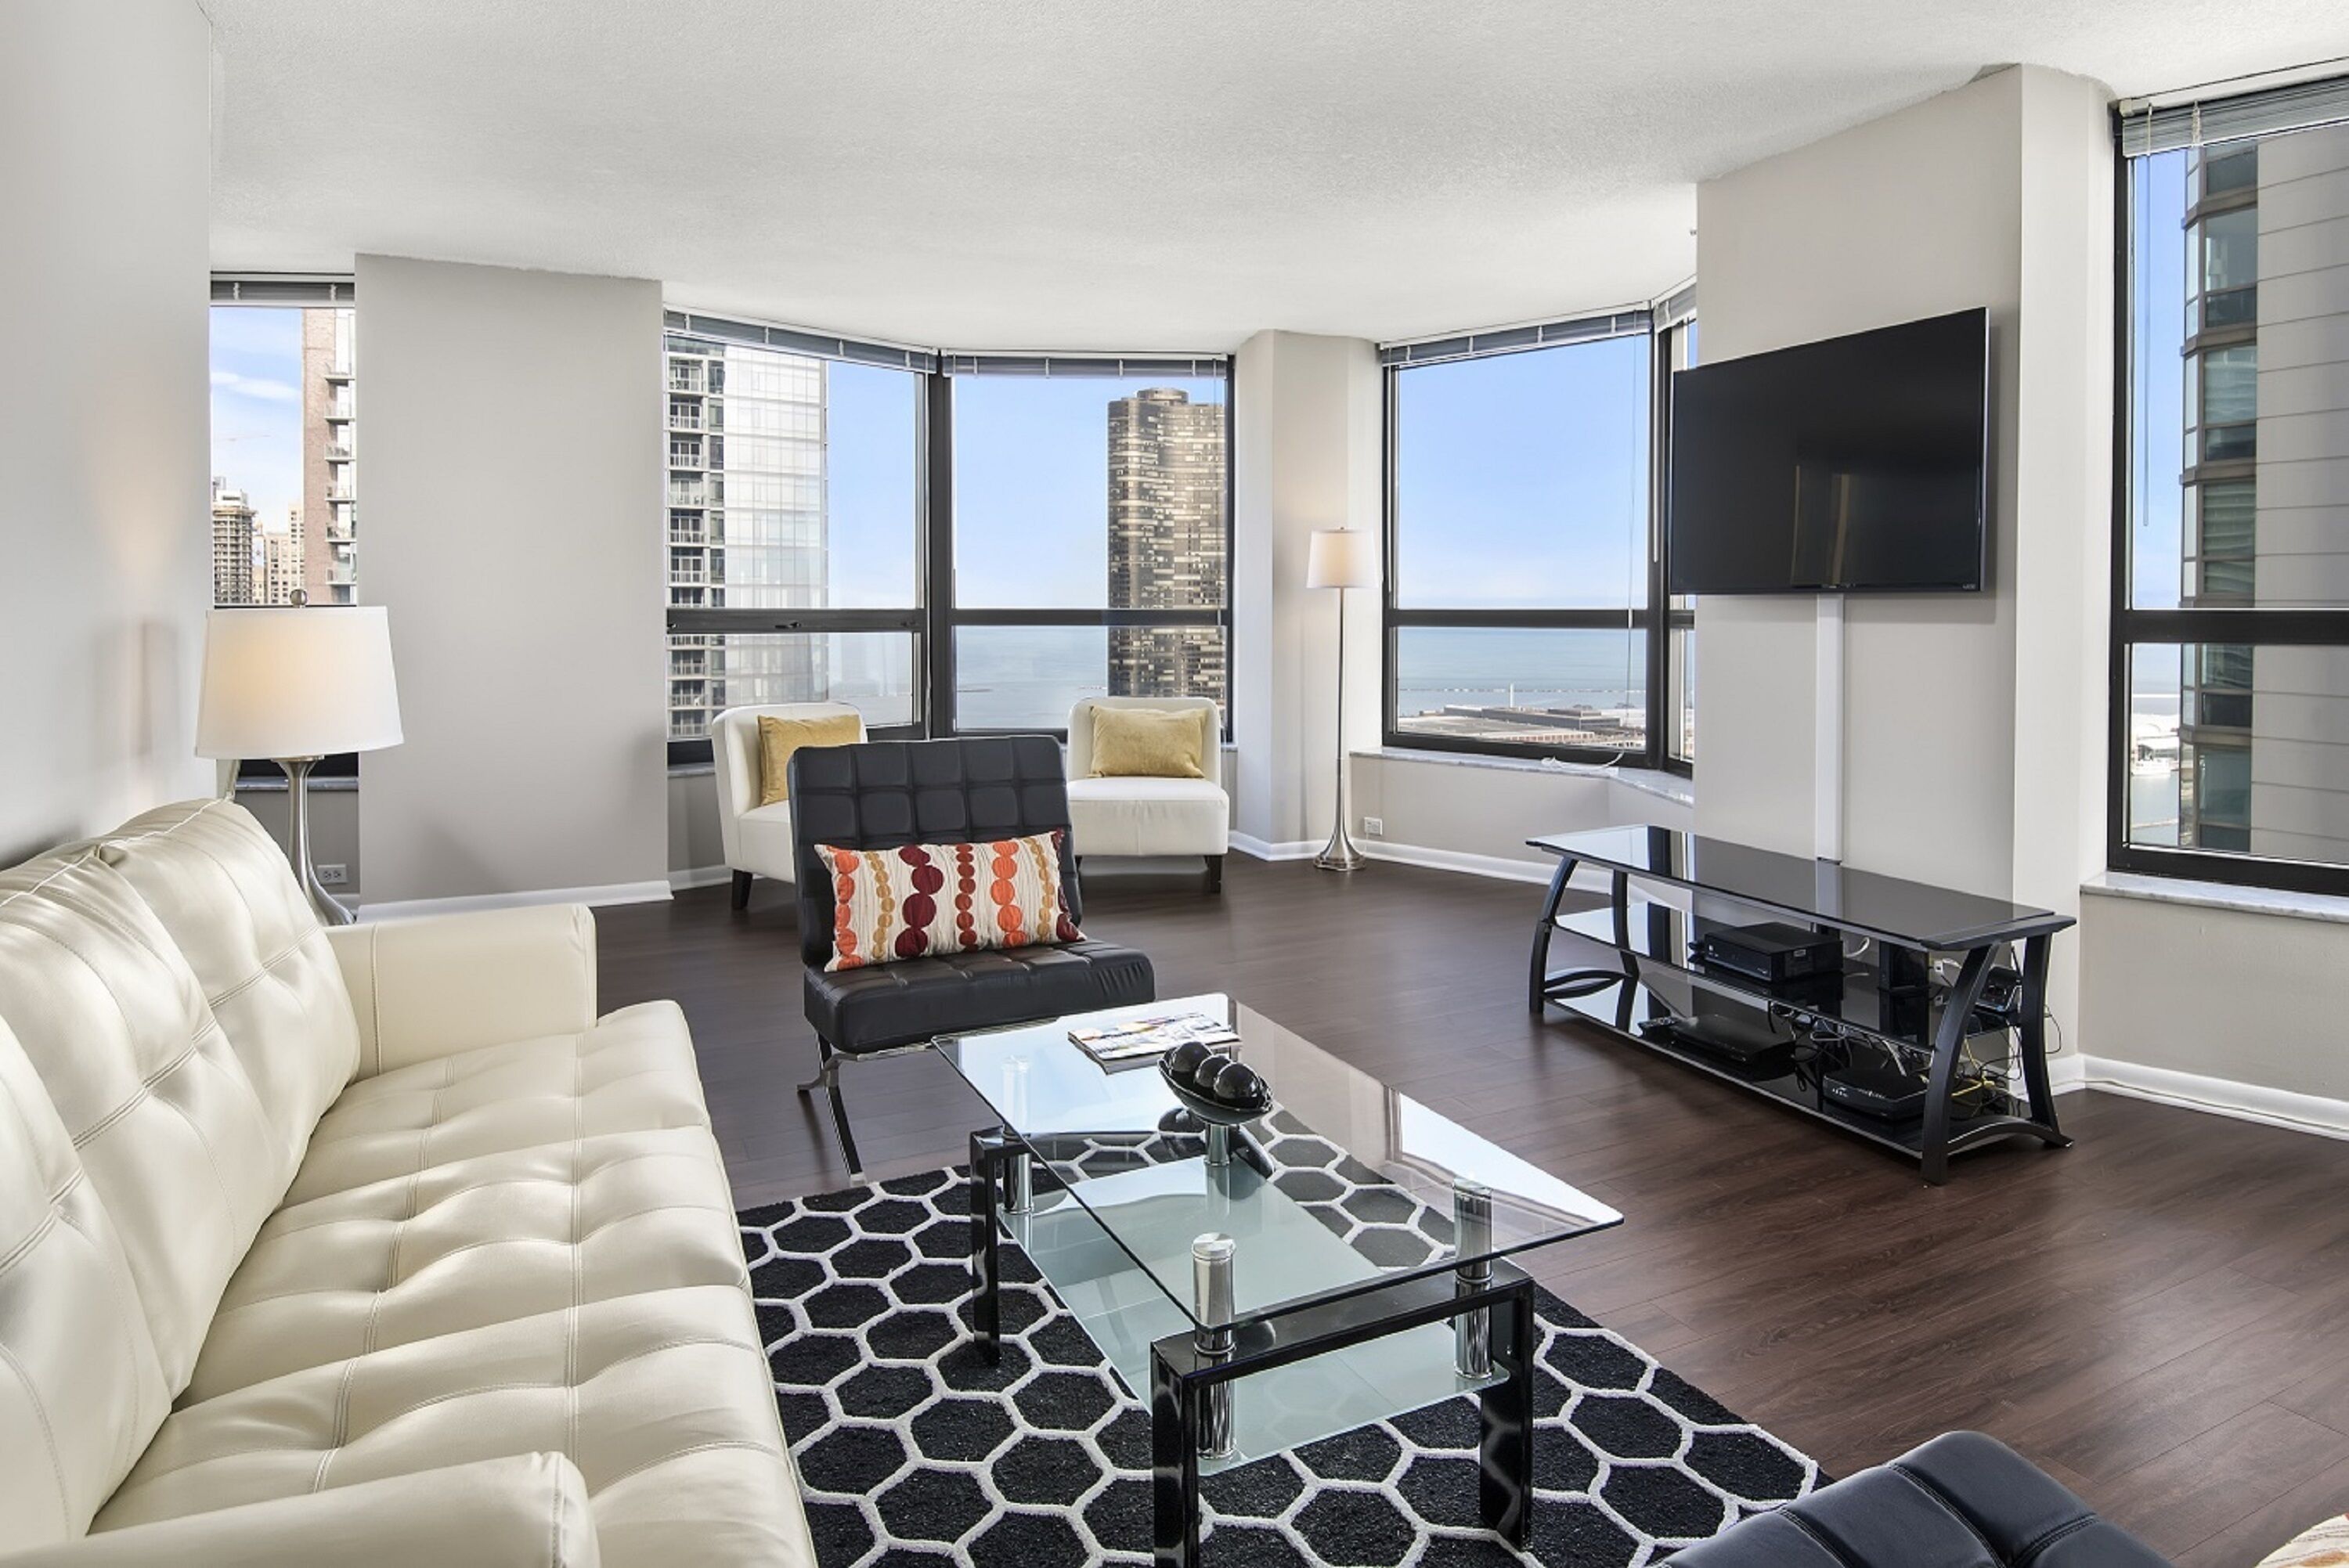 North Harbor Tower by Manilow Suites